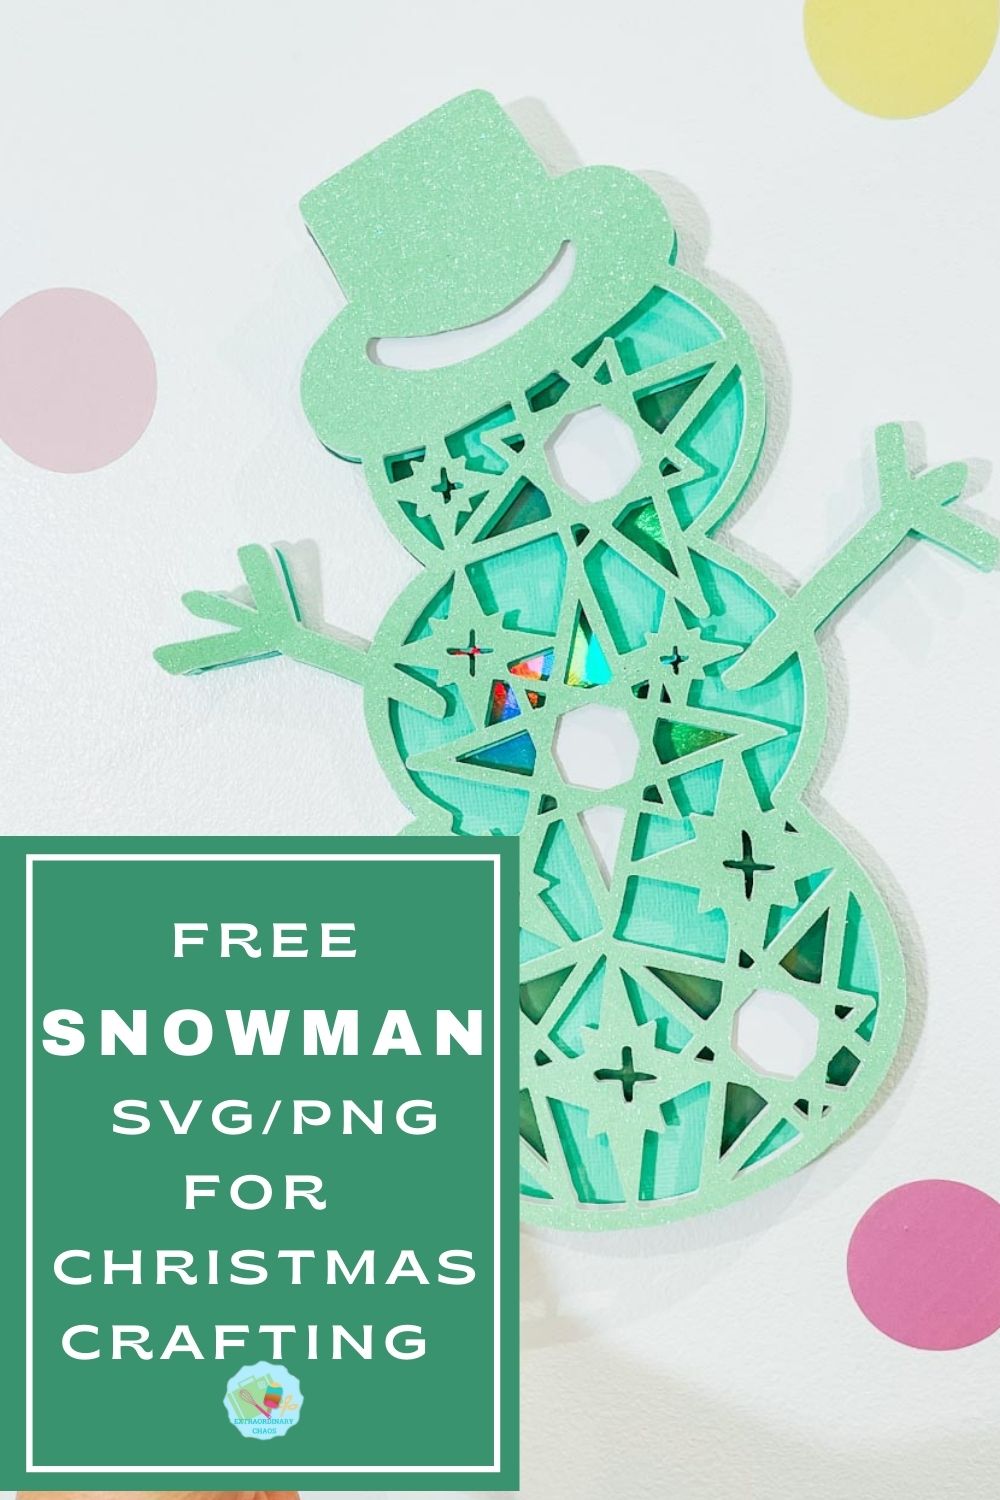 Free Snowman SVG for Christmas Crafting with Cricut and Silhouette to make gifts and cards to sell